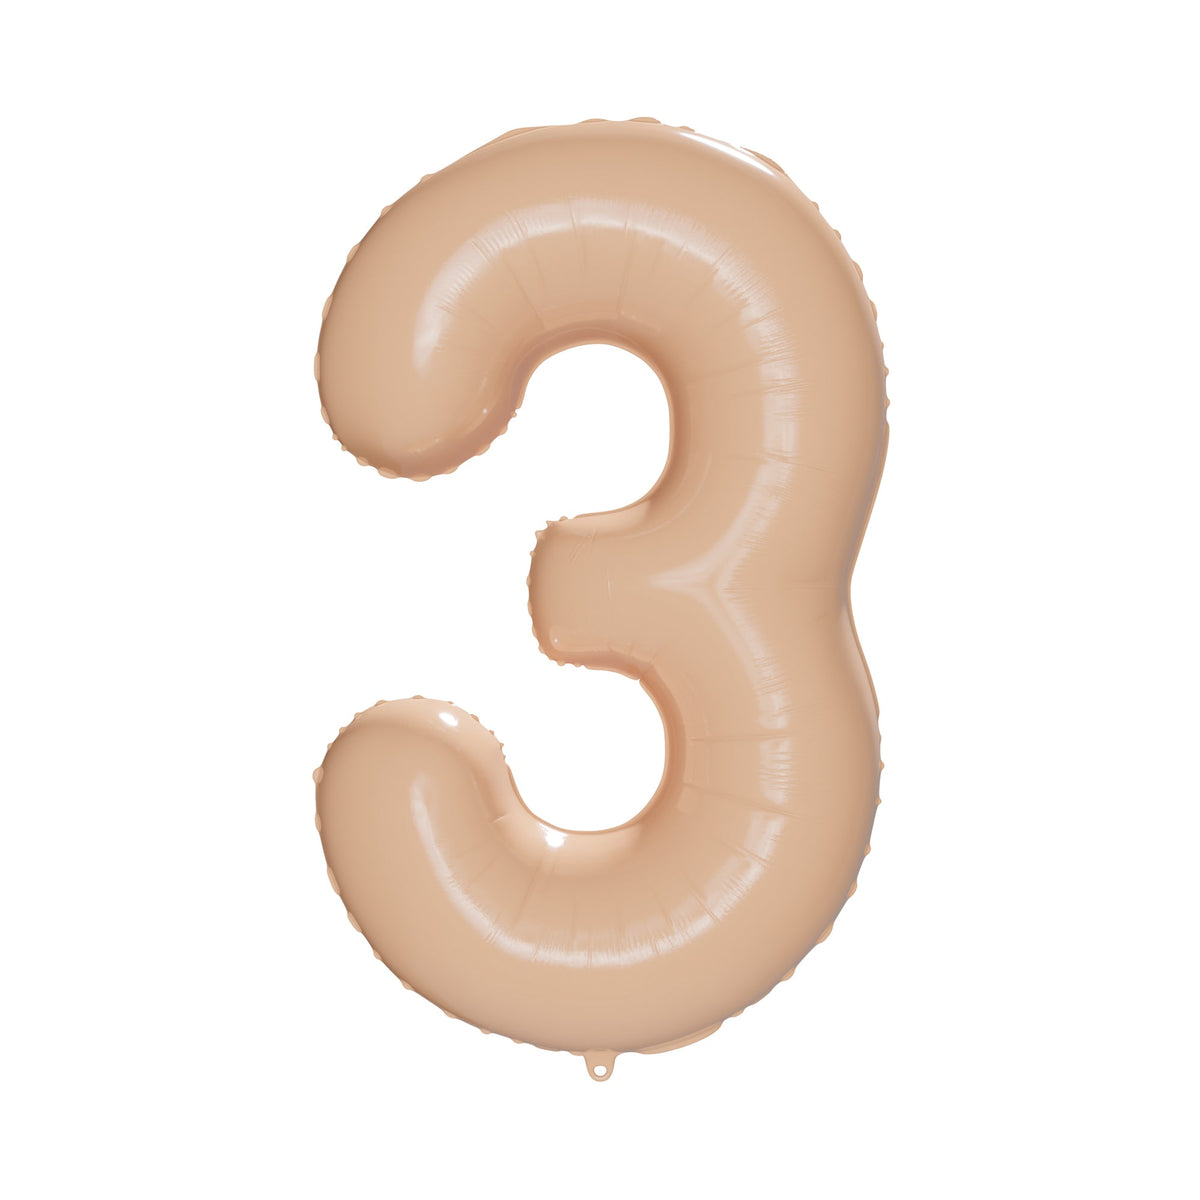 PARTYGRAM Balloons Blush Nude Number 3 Foil Balloon, Creamy Beige Matte Finish, Cappuccino, 34 Inches 810077658376